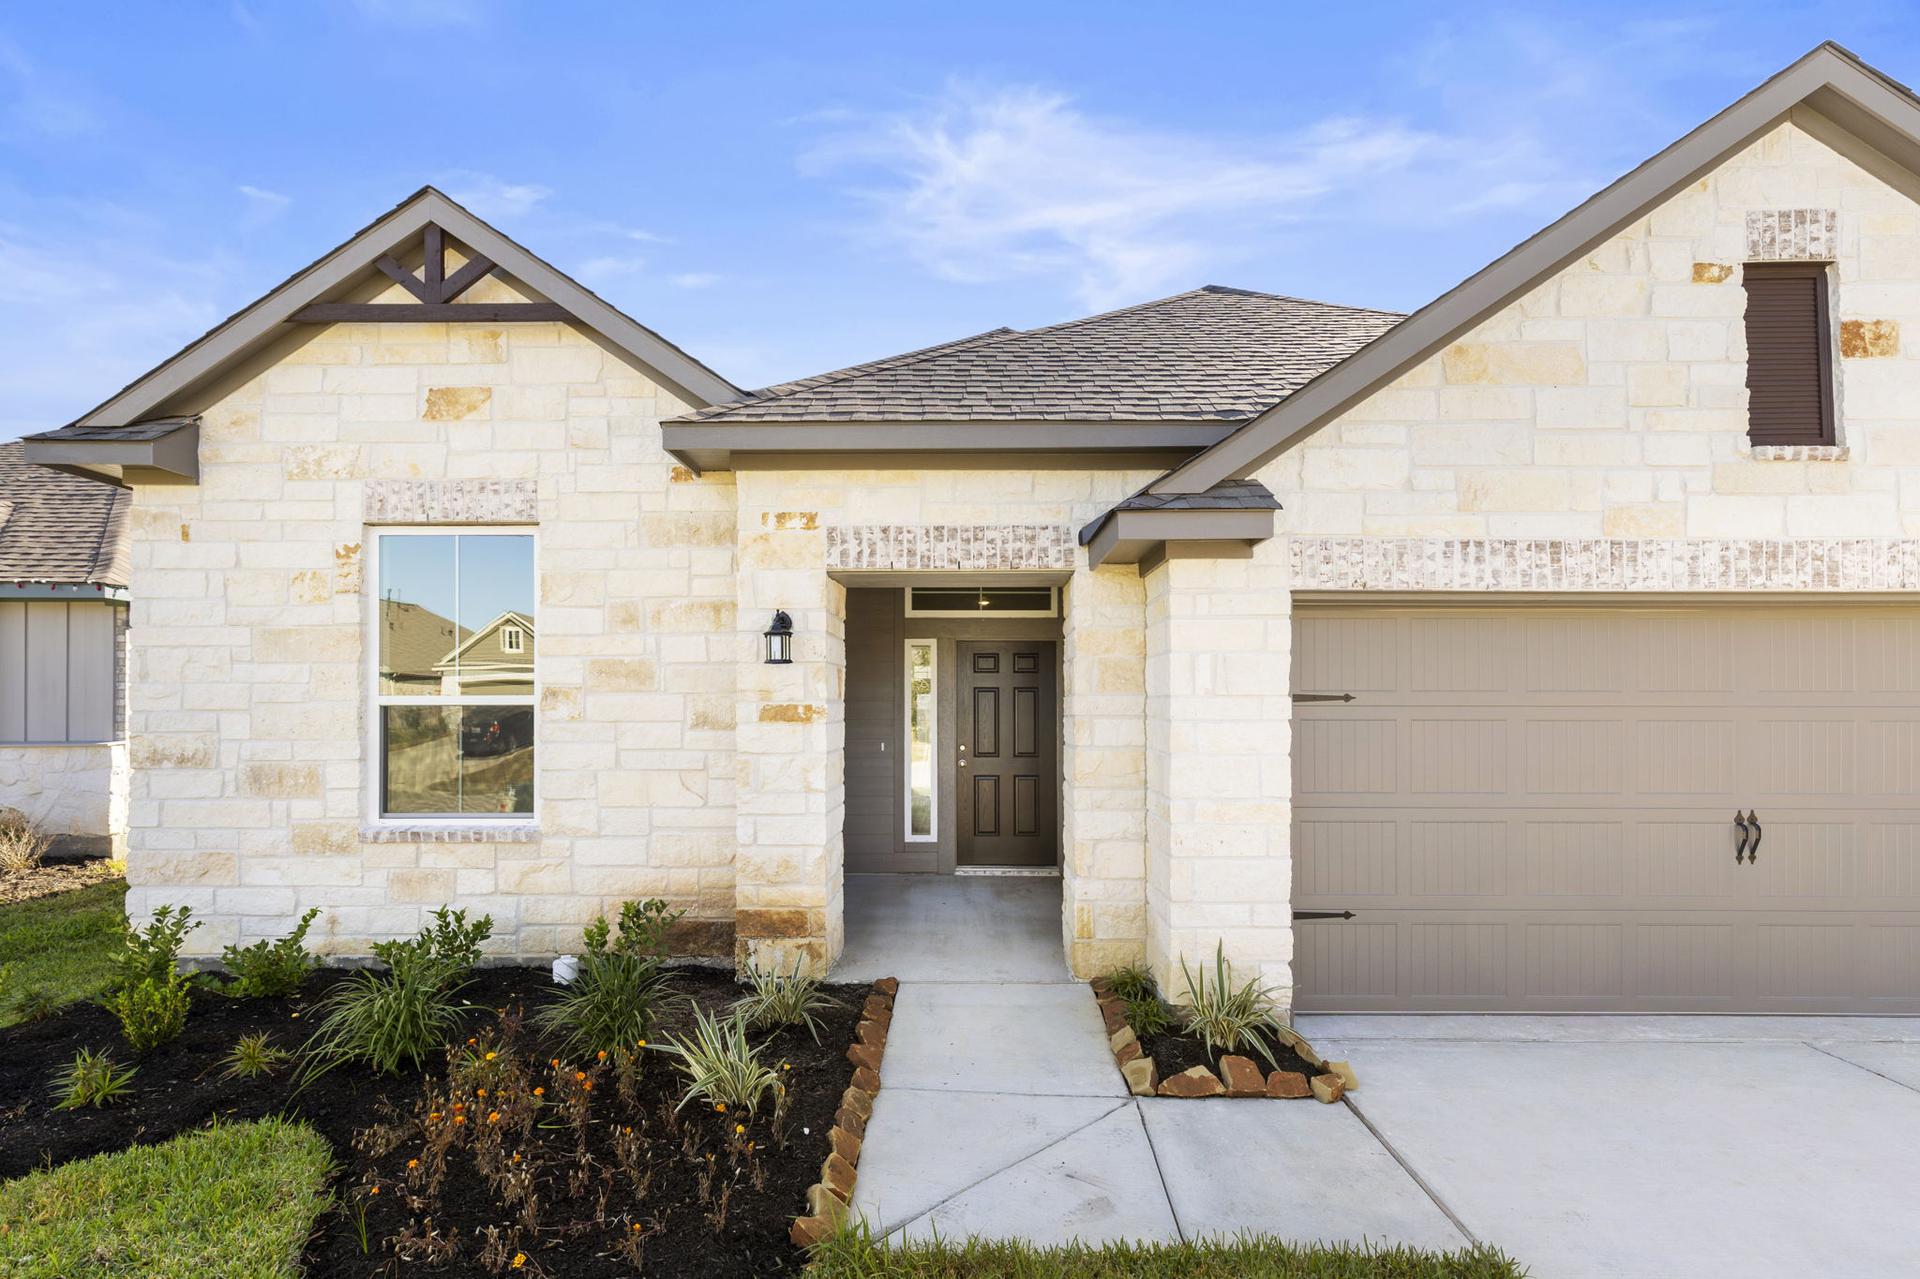 2,091sf New Home in Conroe, TX